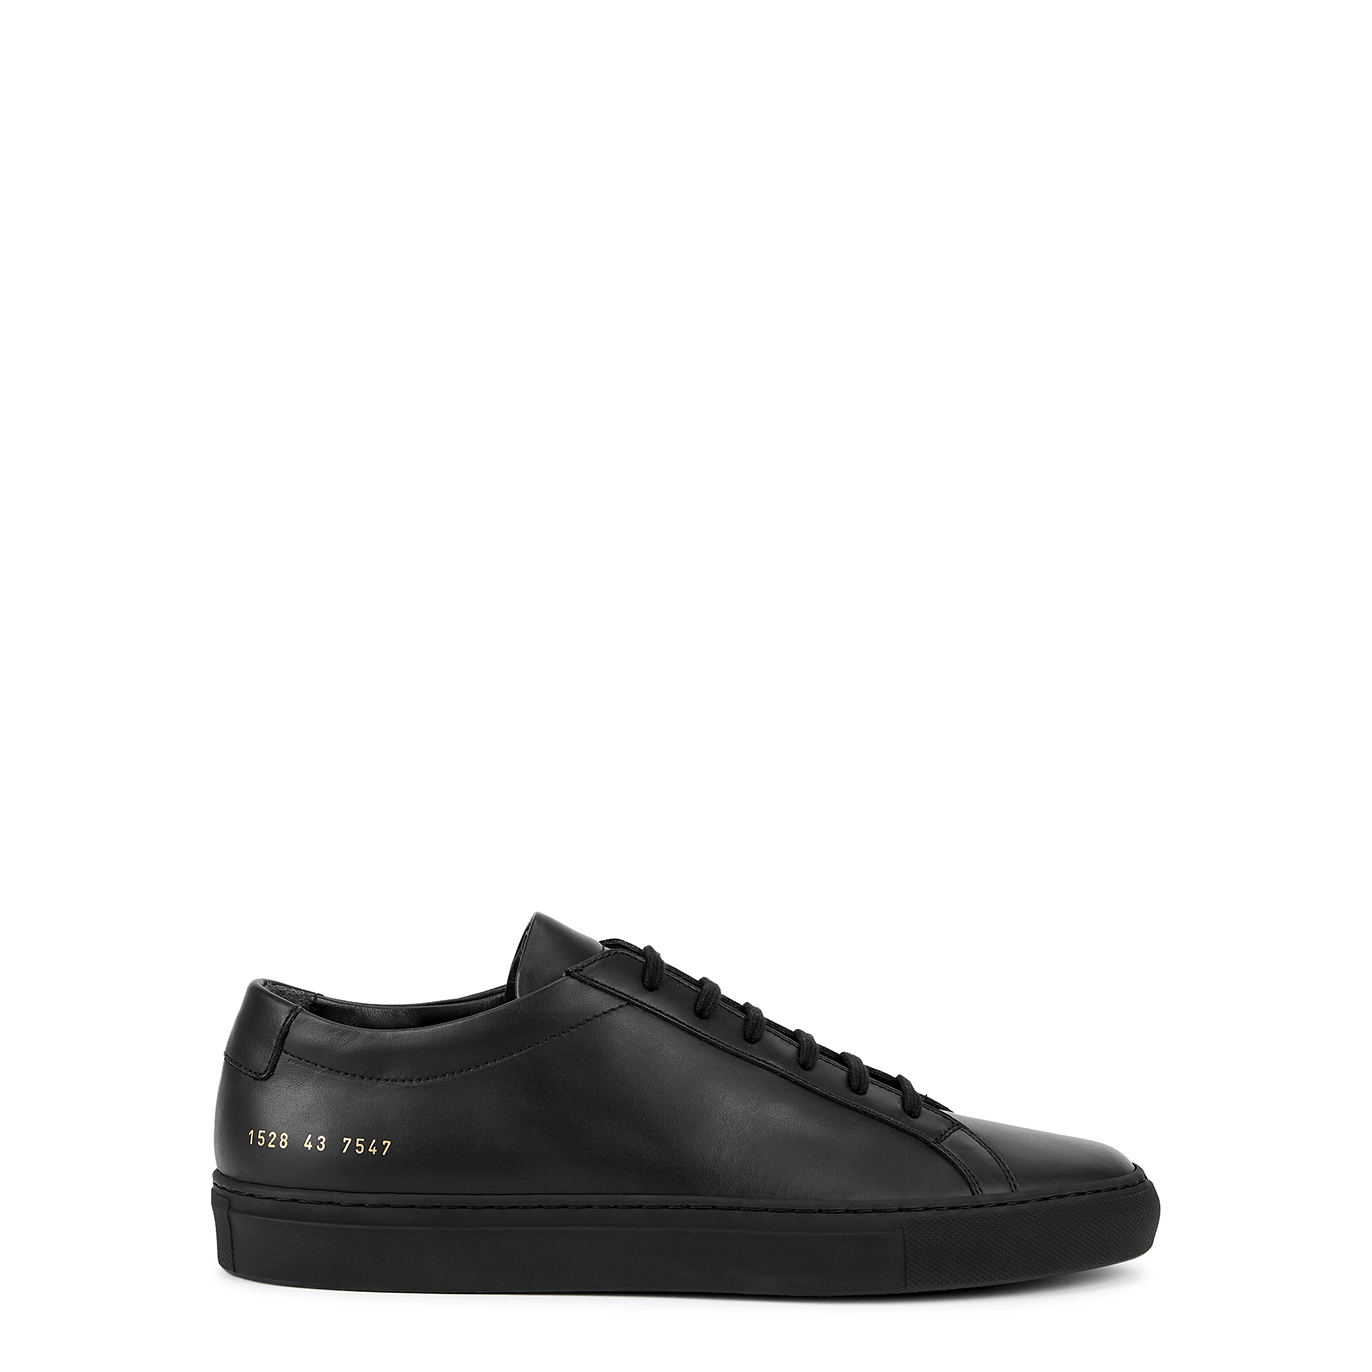 Common Projects Original Achilles Black Leather Sneakers - 5